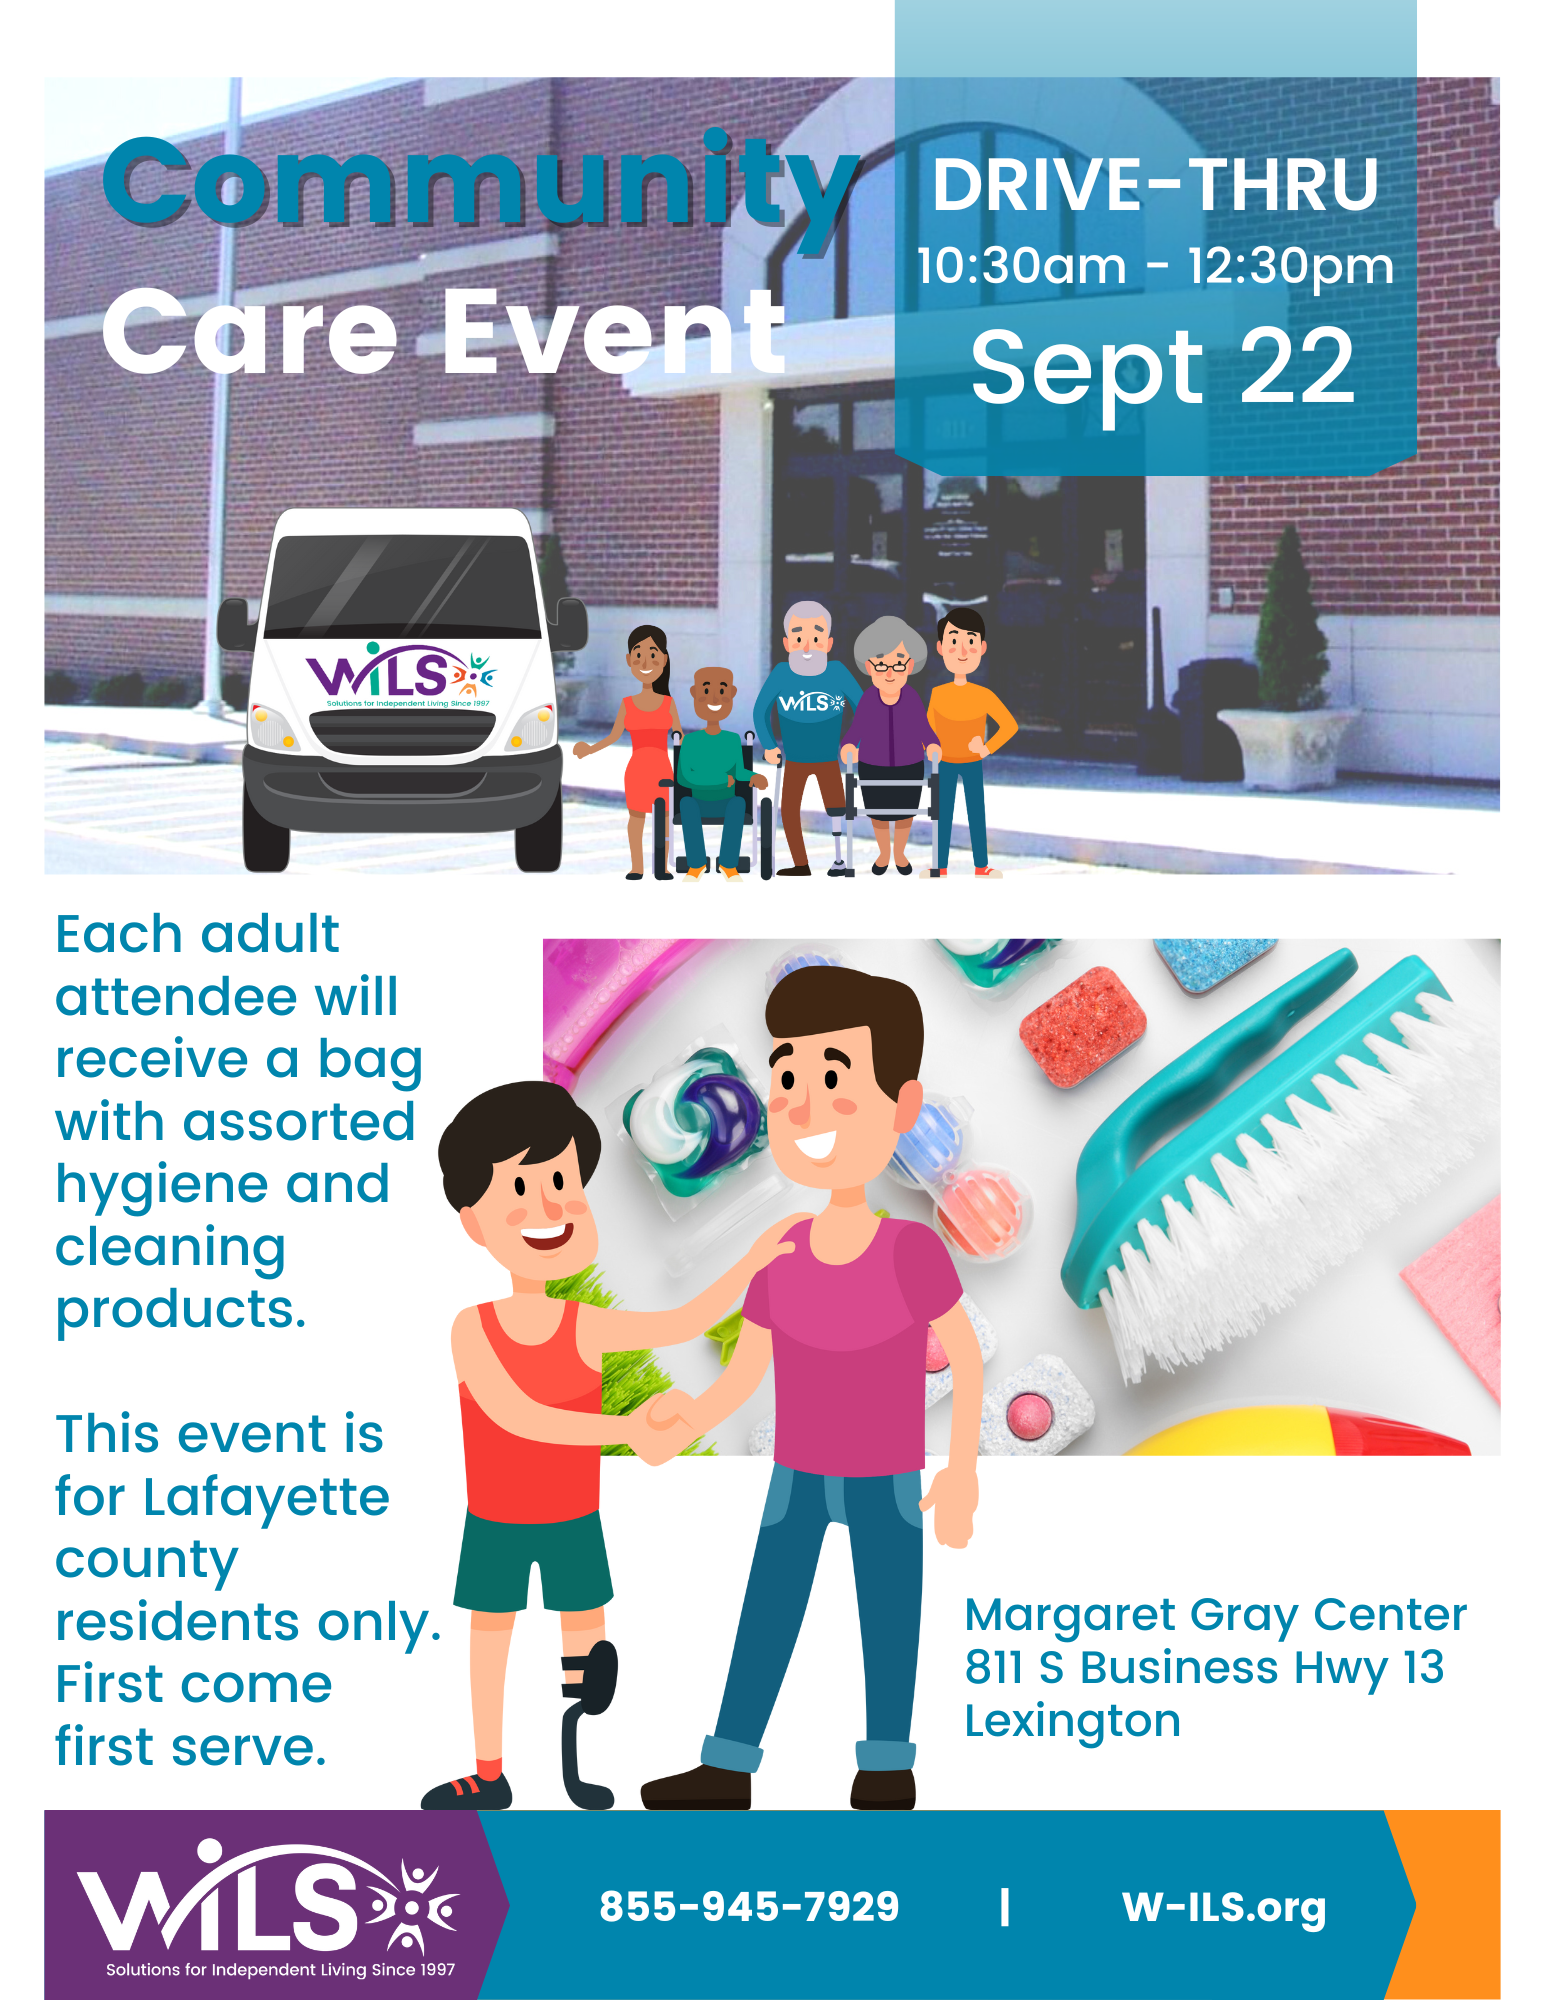 Community Care - Lafayette County @ The Margaret Gray Center